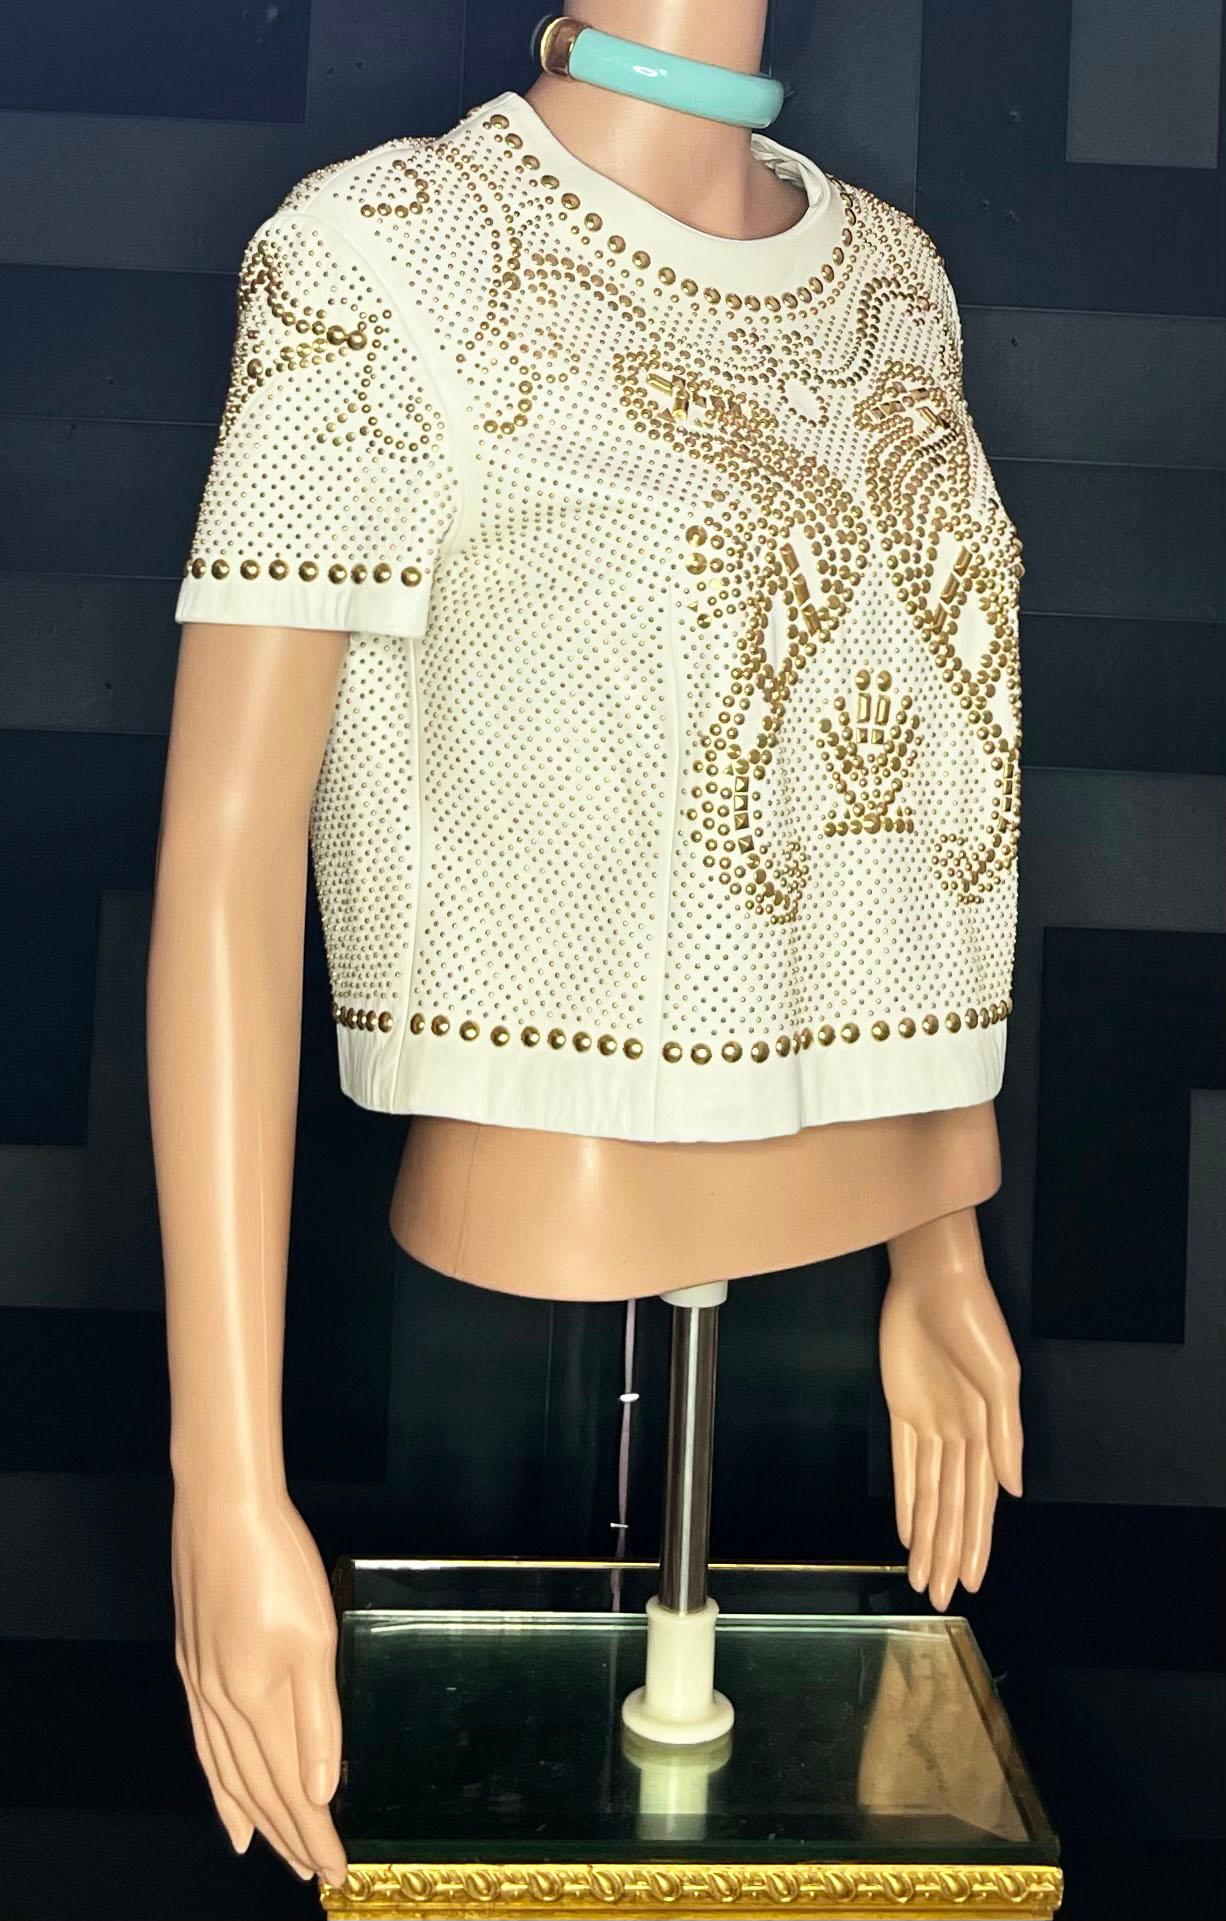 S/S 2012 L#26 VERSACE STUDDED LEATHER SEAHORSE CROP TOP Sz IT 44 For Sale 2